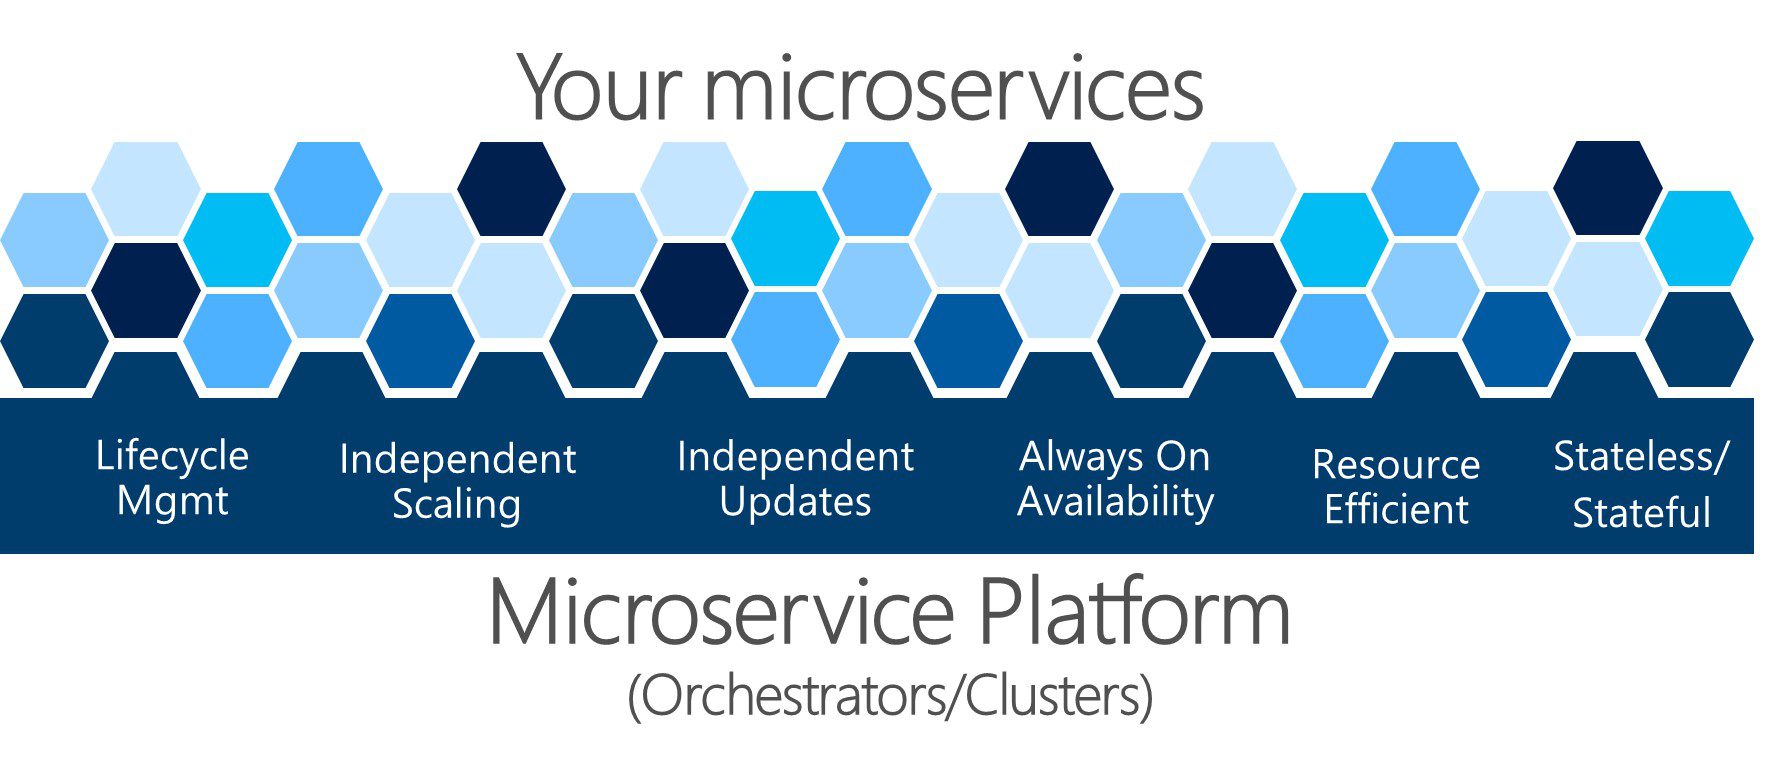 Yourmicroservices